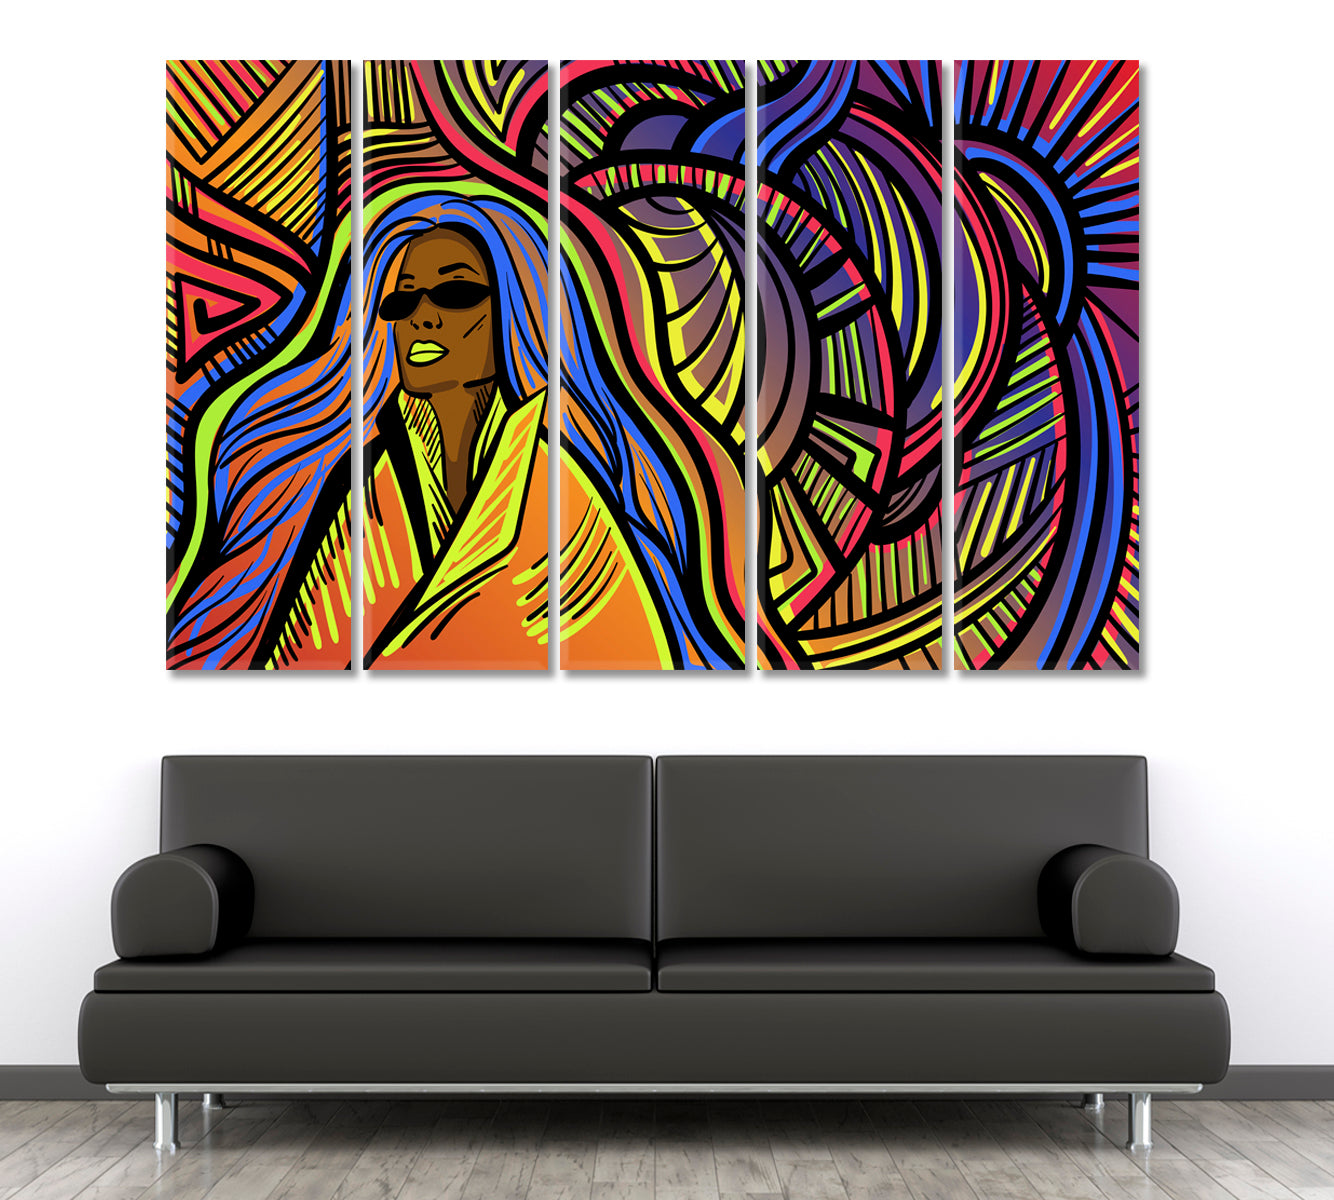 DOODLES Colorful Psychedelic Lines With Abstract Woman Surreal Fantasy Large Art Print Décor Artesty 5 panels 36" x 24" 